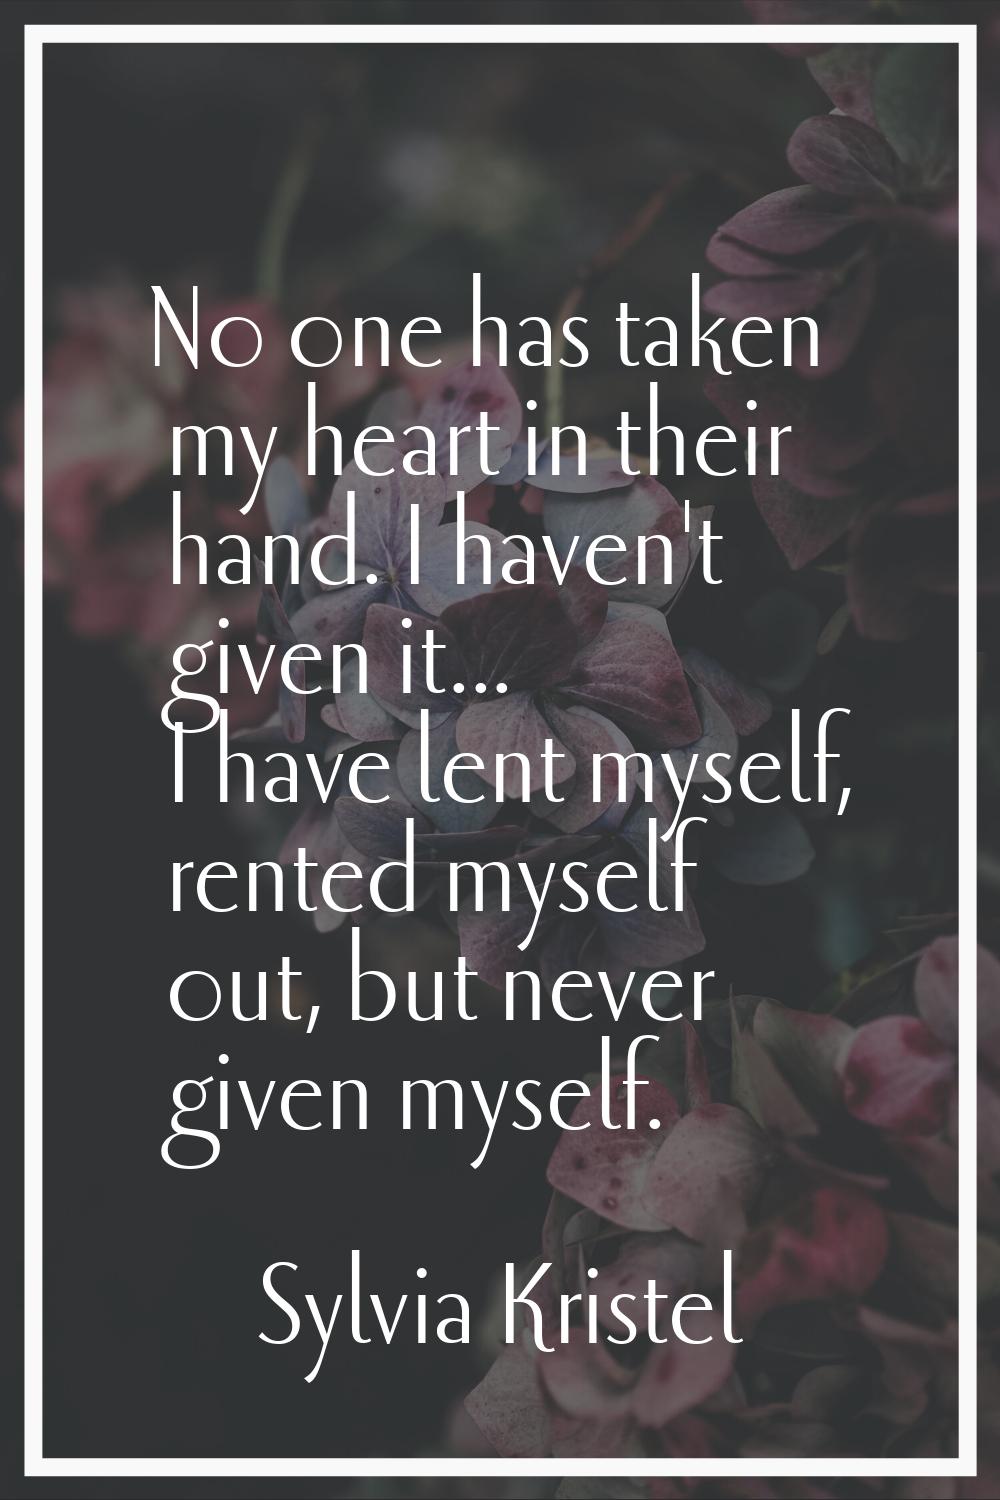 No one has taken my heart in their hand. I haven't given it... I have lent myself, rented myself ou